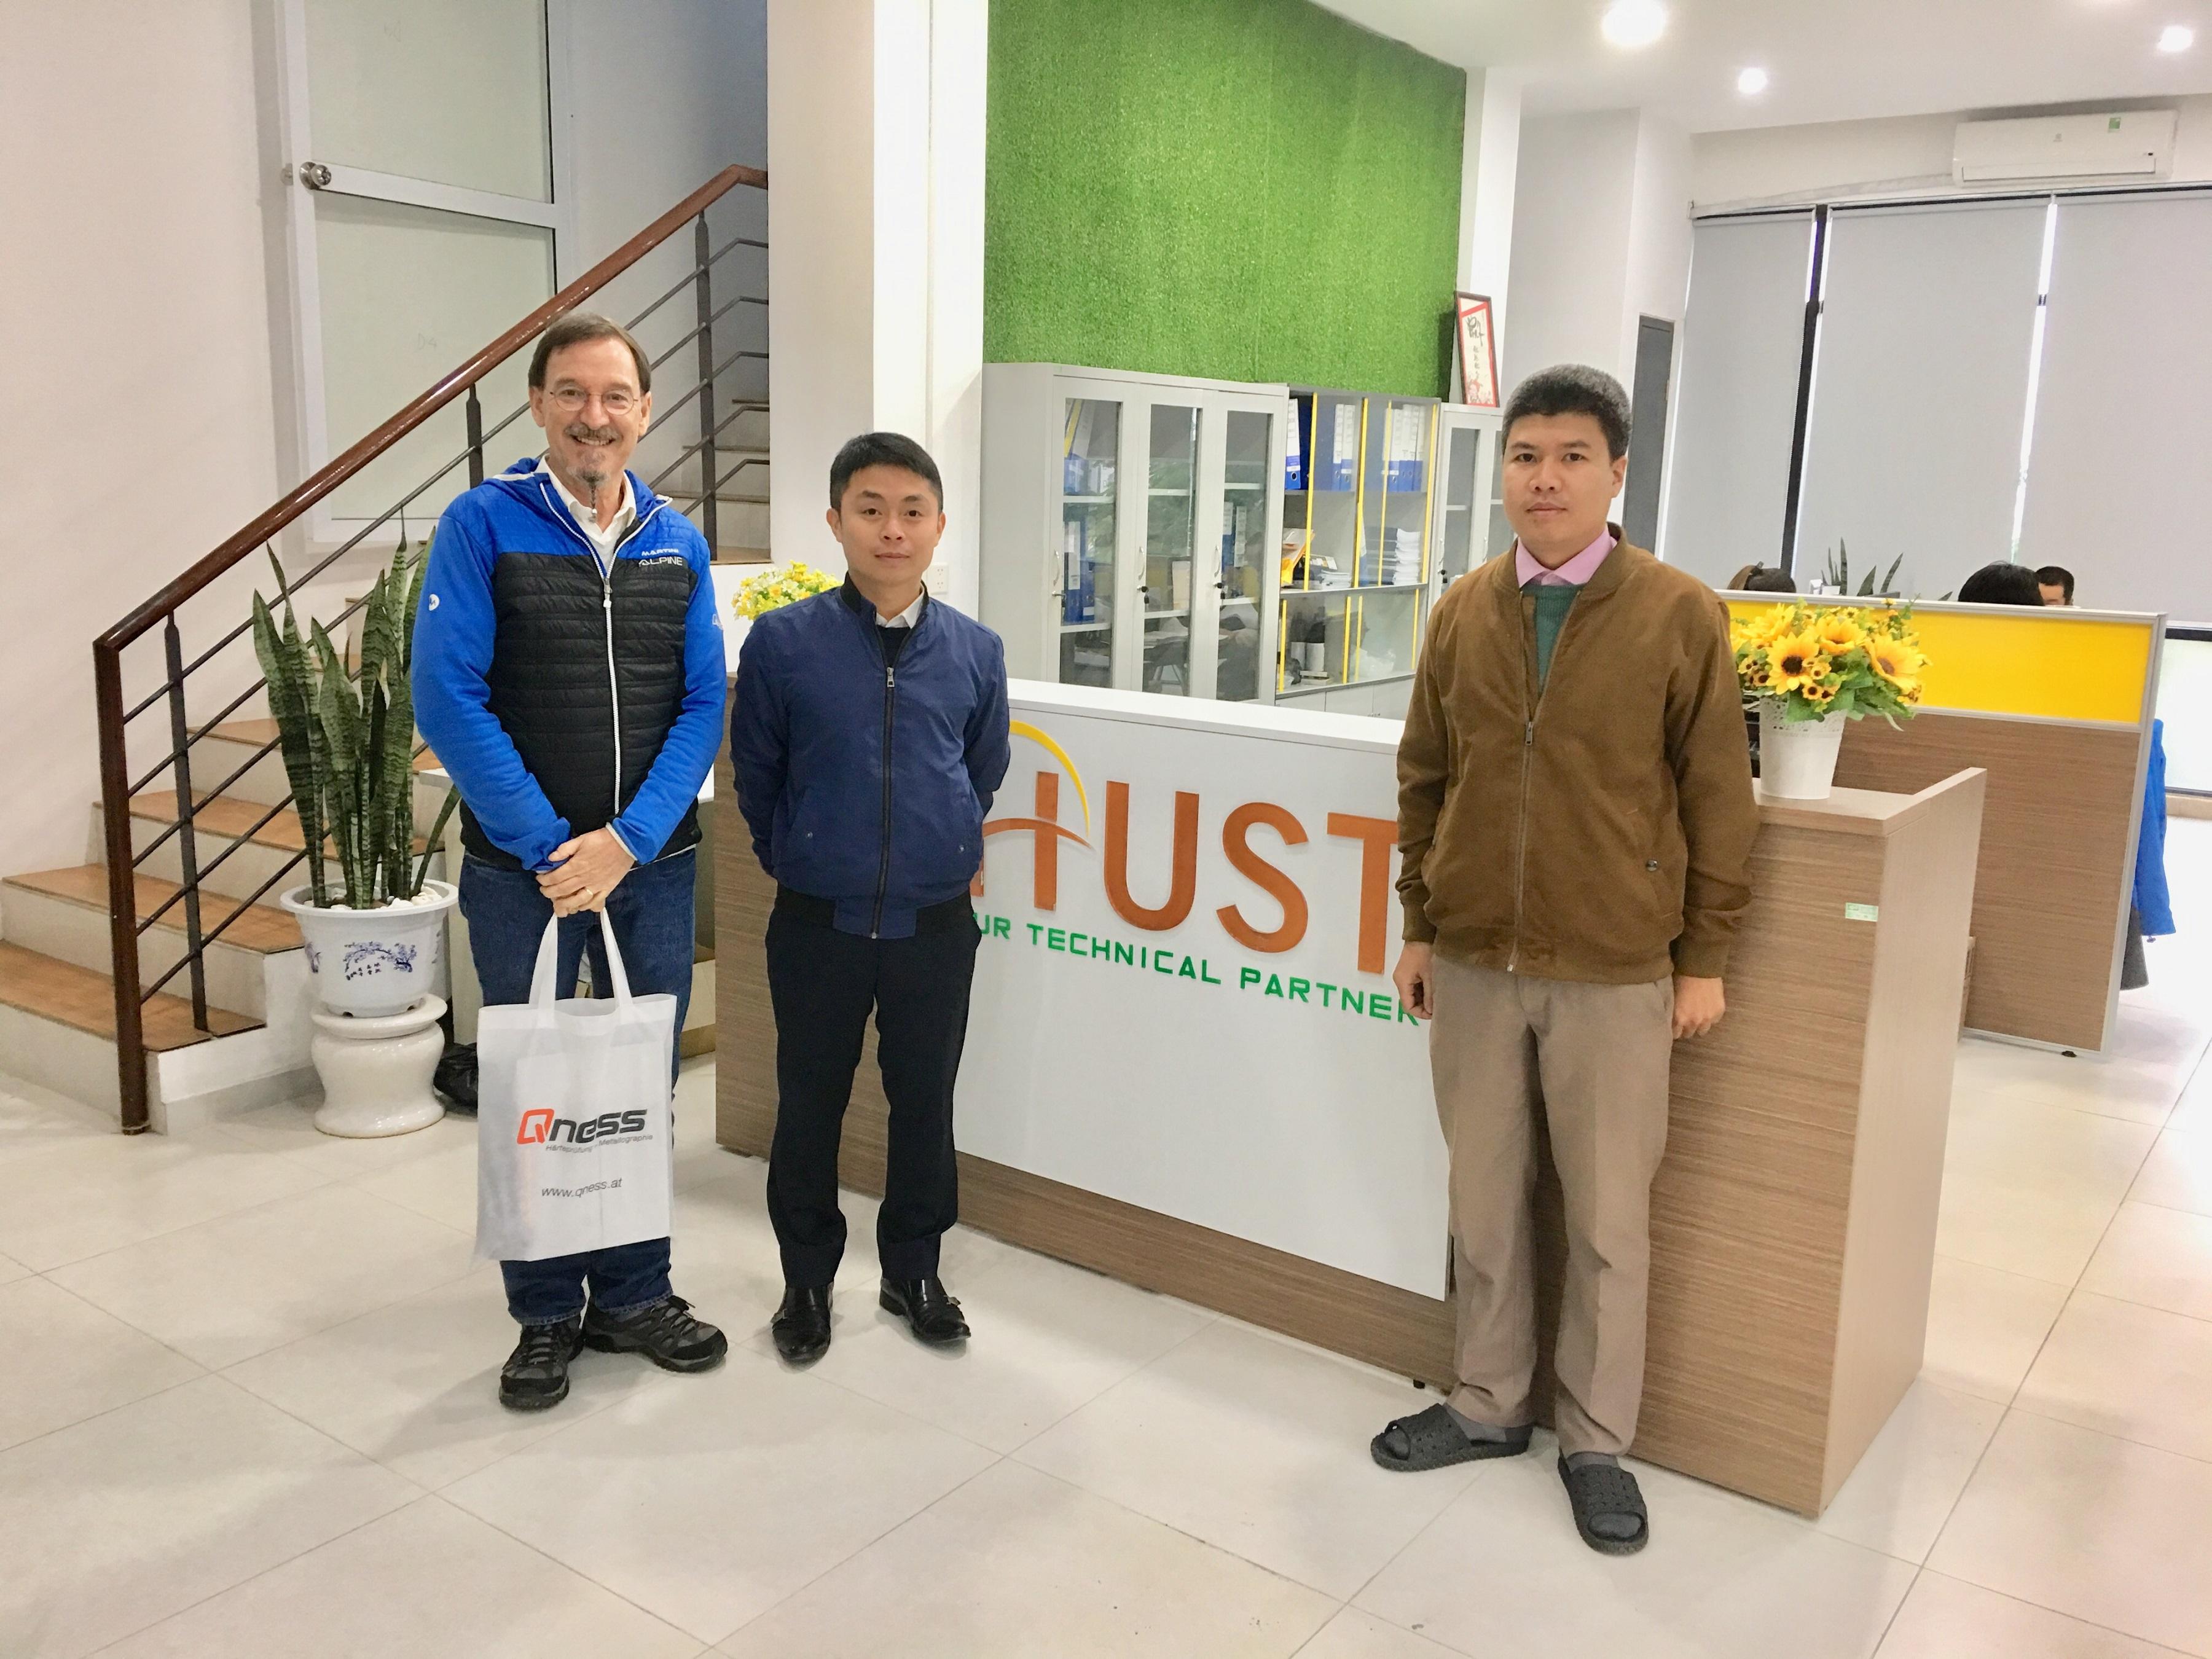 Qness experts visited and worked at HUST VN